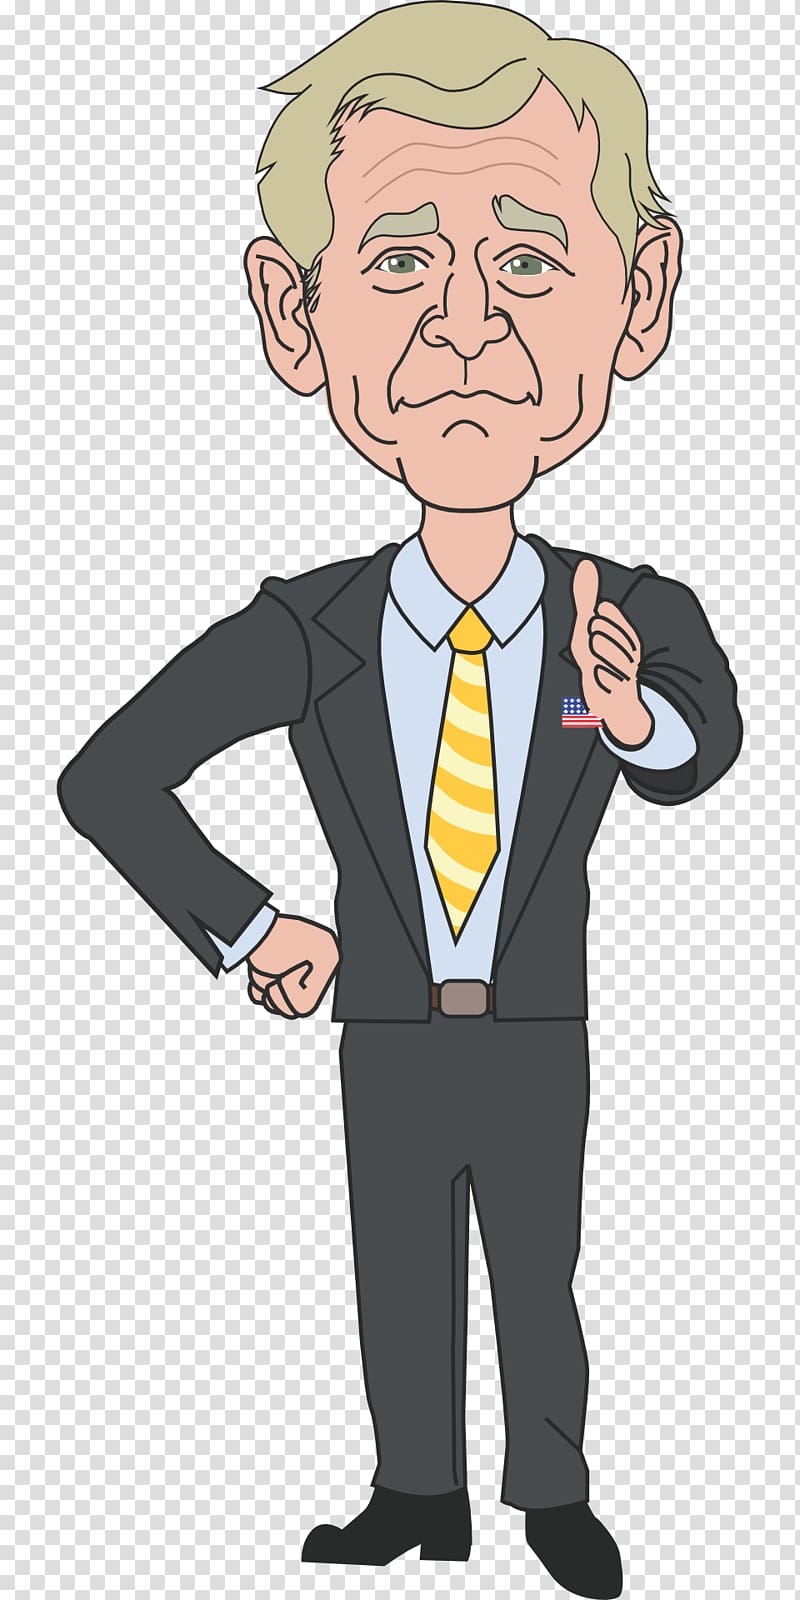 George W. Bush President of the United States , Bush transparent background PNG clipart